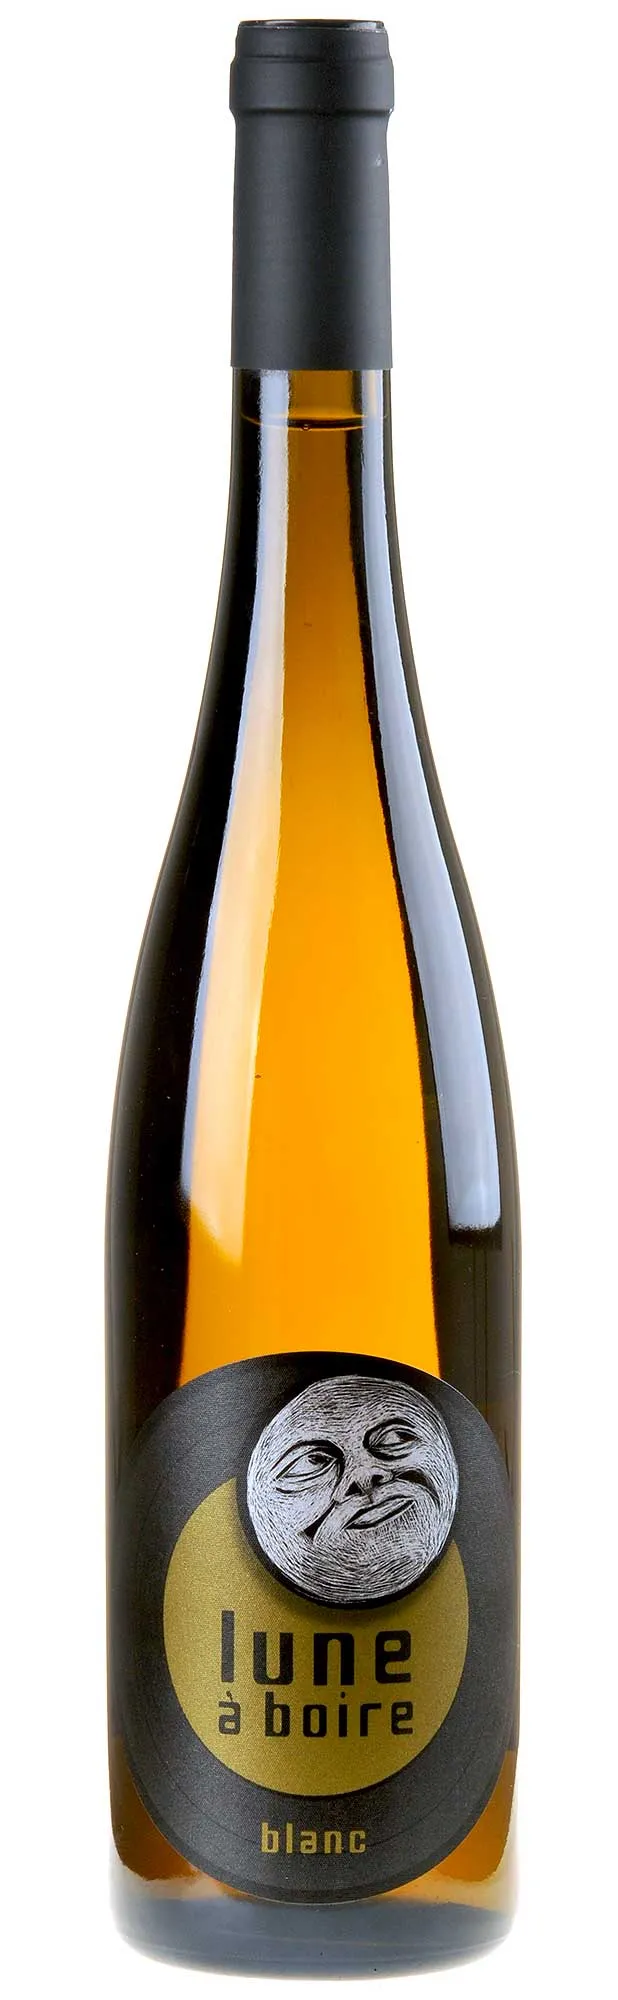 Bottle of Marc Kreydenweiss Lune à Boire Blanc from search results